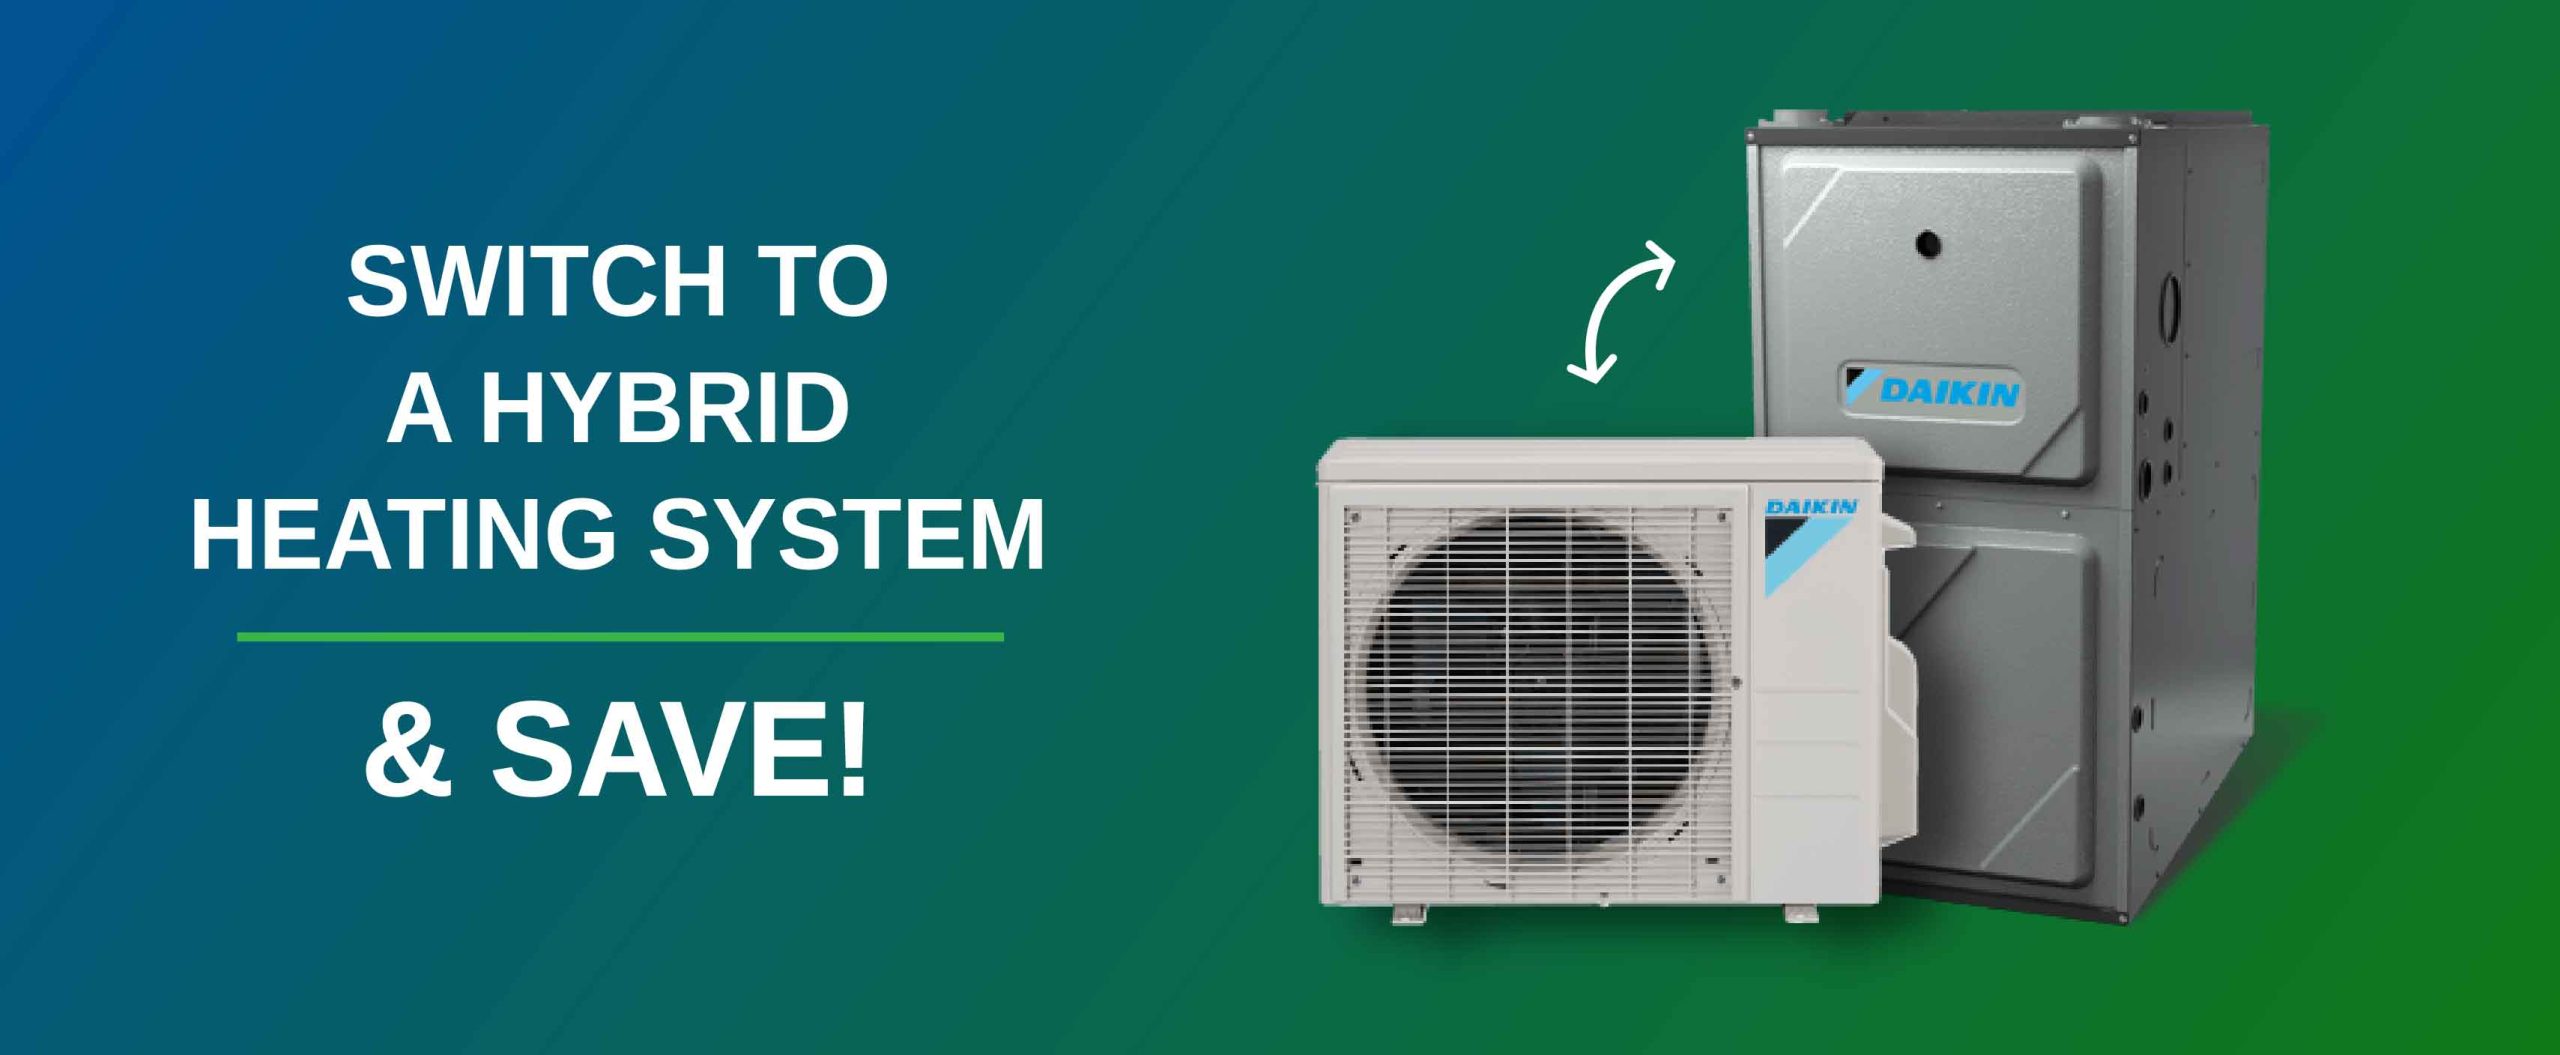 Switch to a Hybrid Heating System & Save! - HAMCO Heating & Cooling